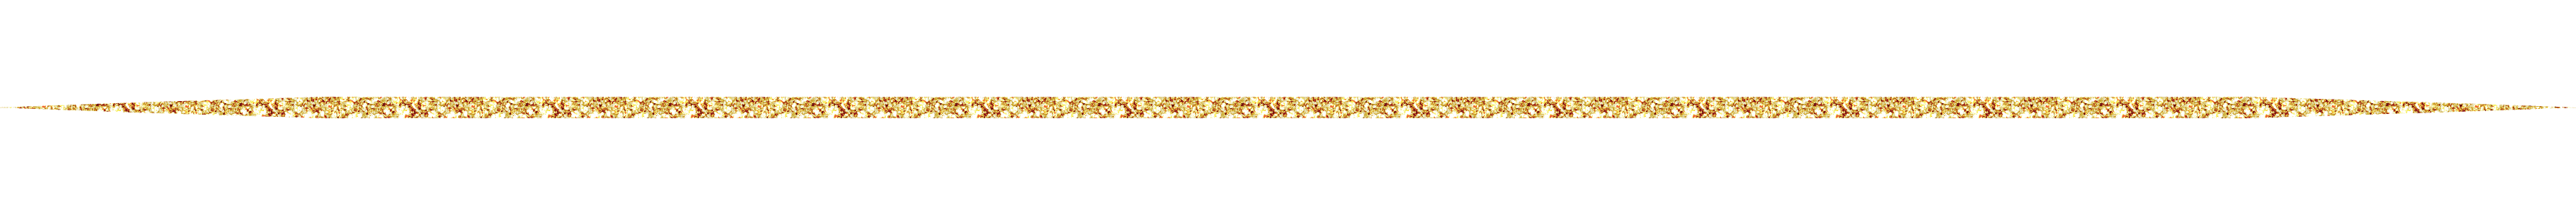 Free Gold Line Png Download Free Gold Line Png Png Images Free Cliparts On Clipart Library